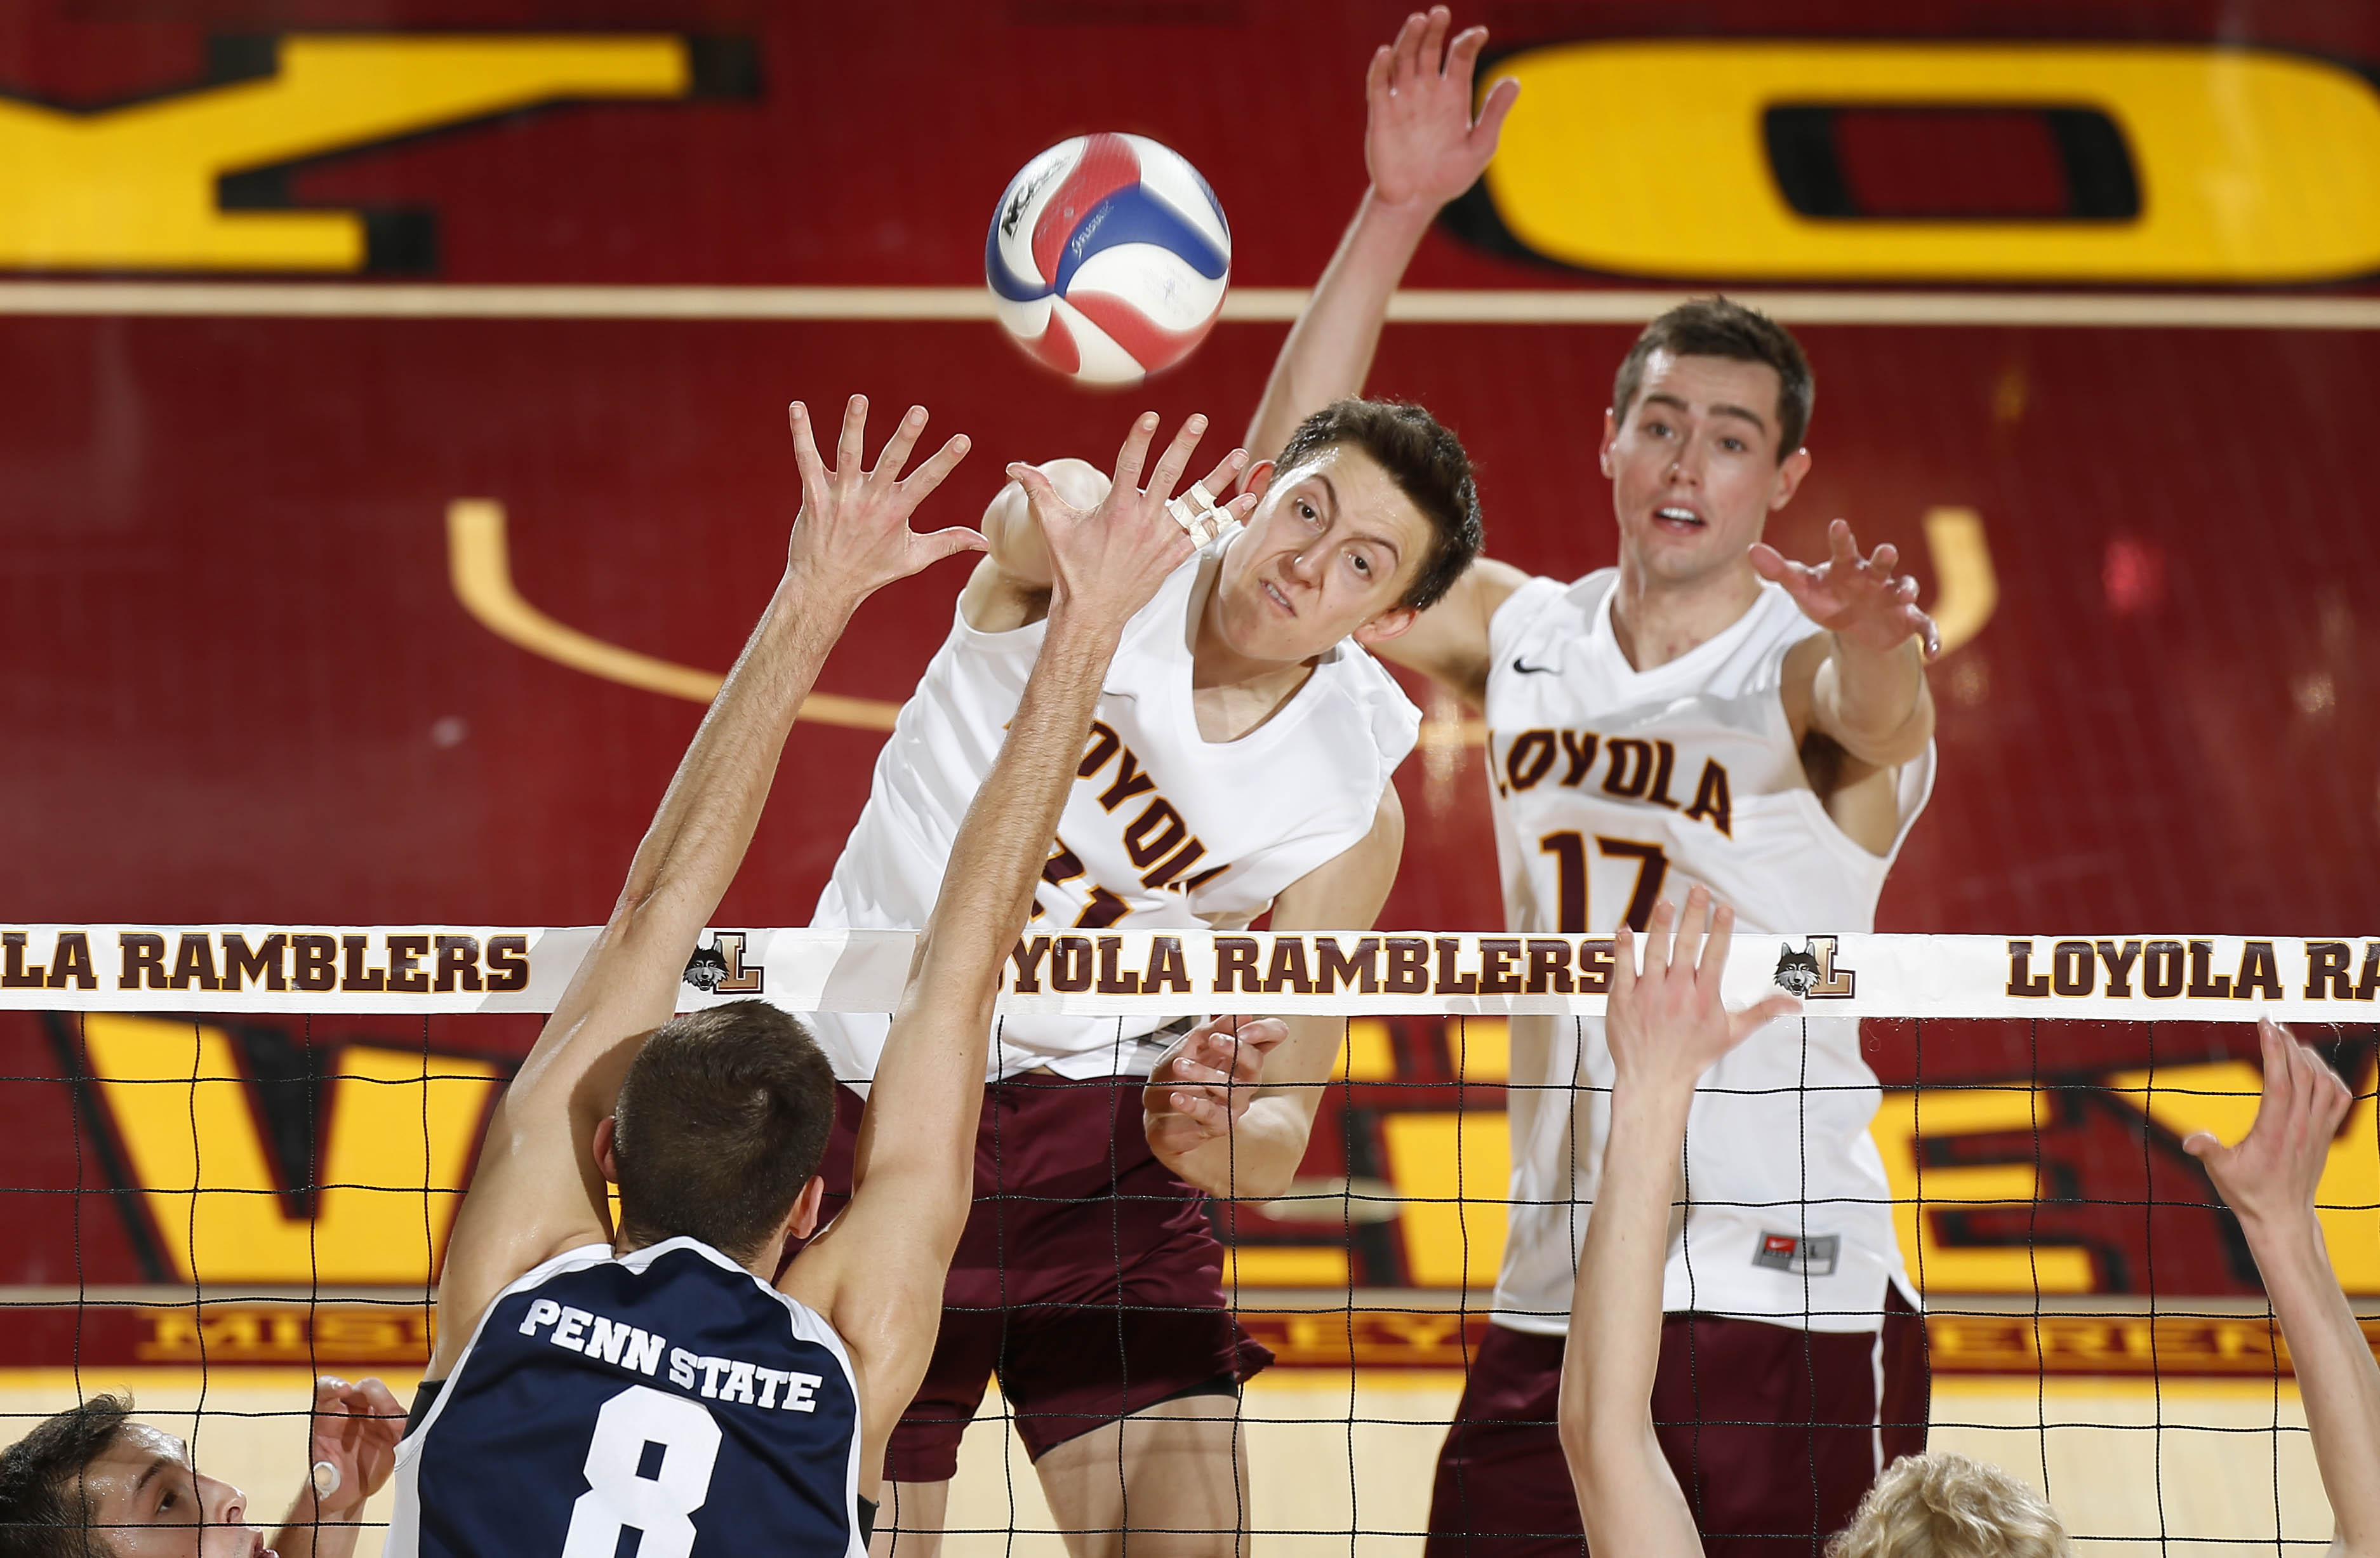 Then-Loyola teammates Jeff Jendryk (left) and Thomas Jaeschke during a winning match against Penn State in 2015.